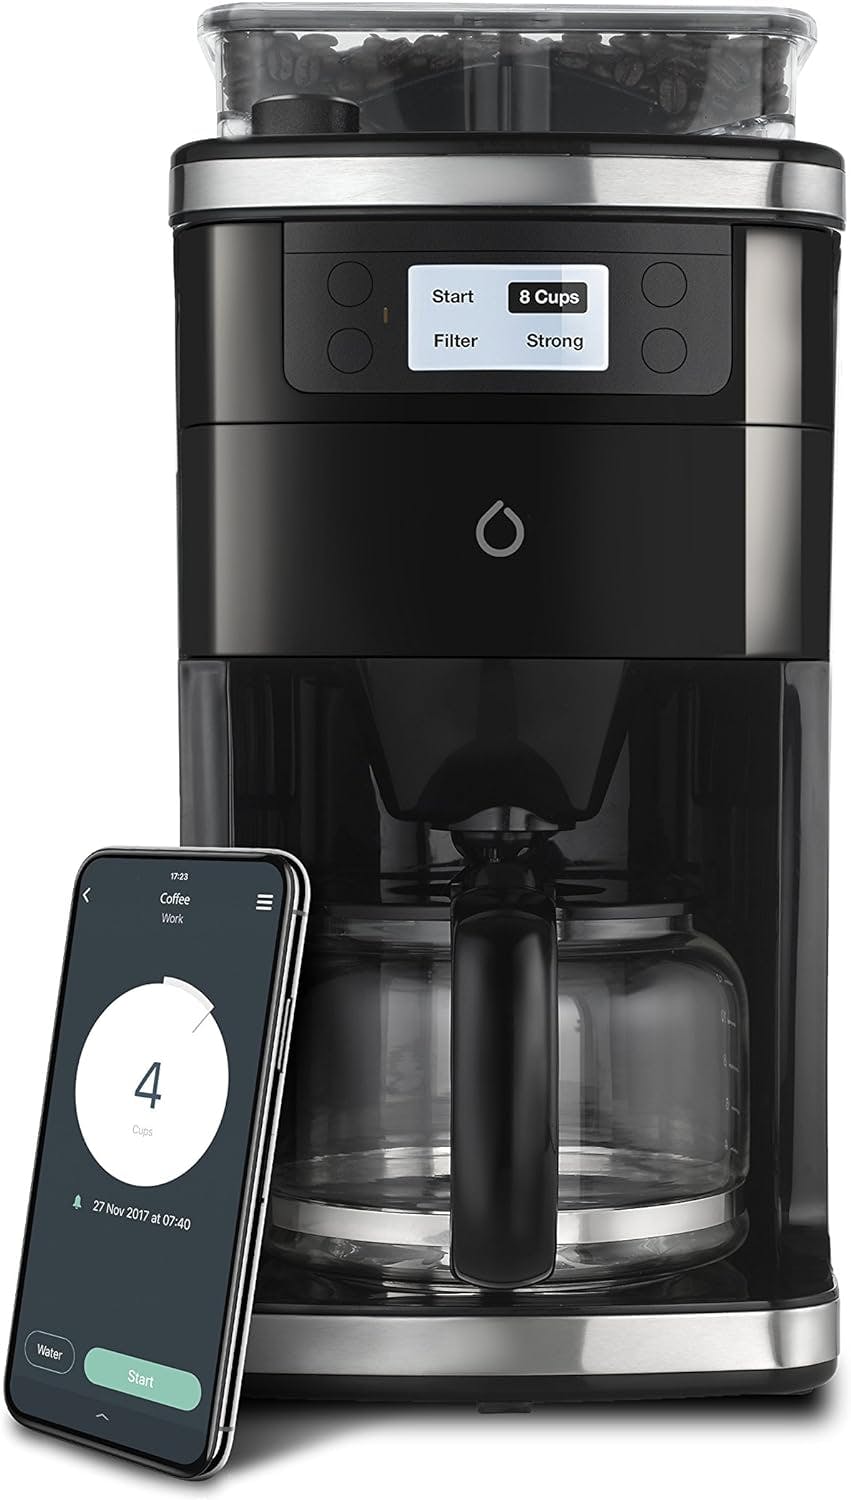 Smart 12-Cup Black Glass Carafe Coffee Maker with Grinder & App Control